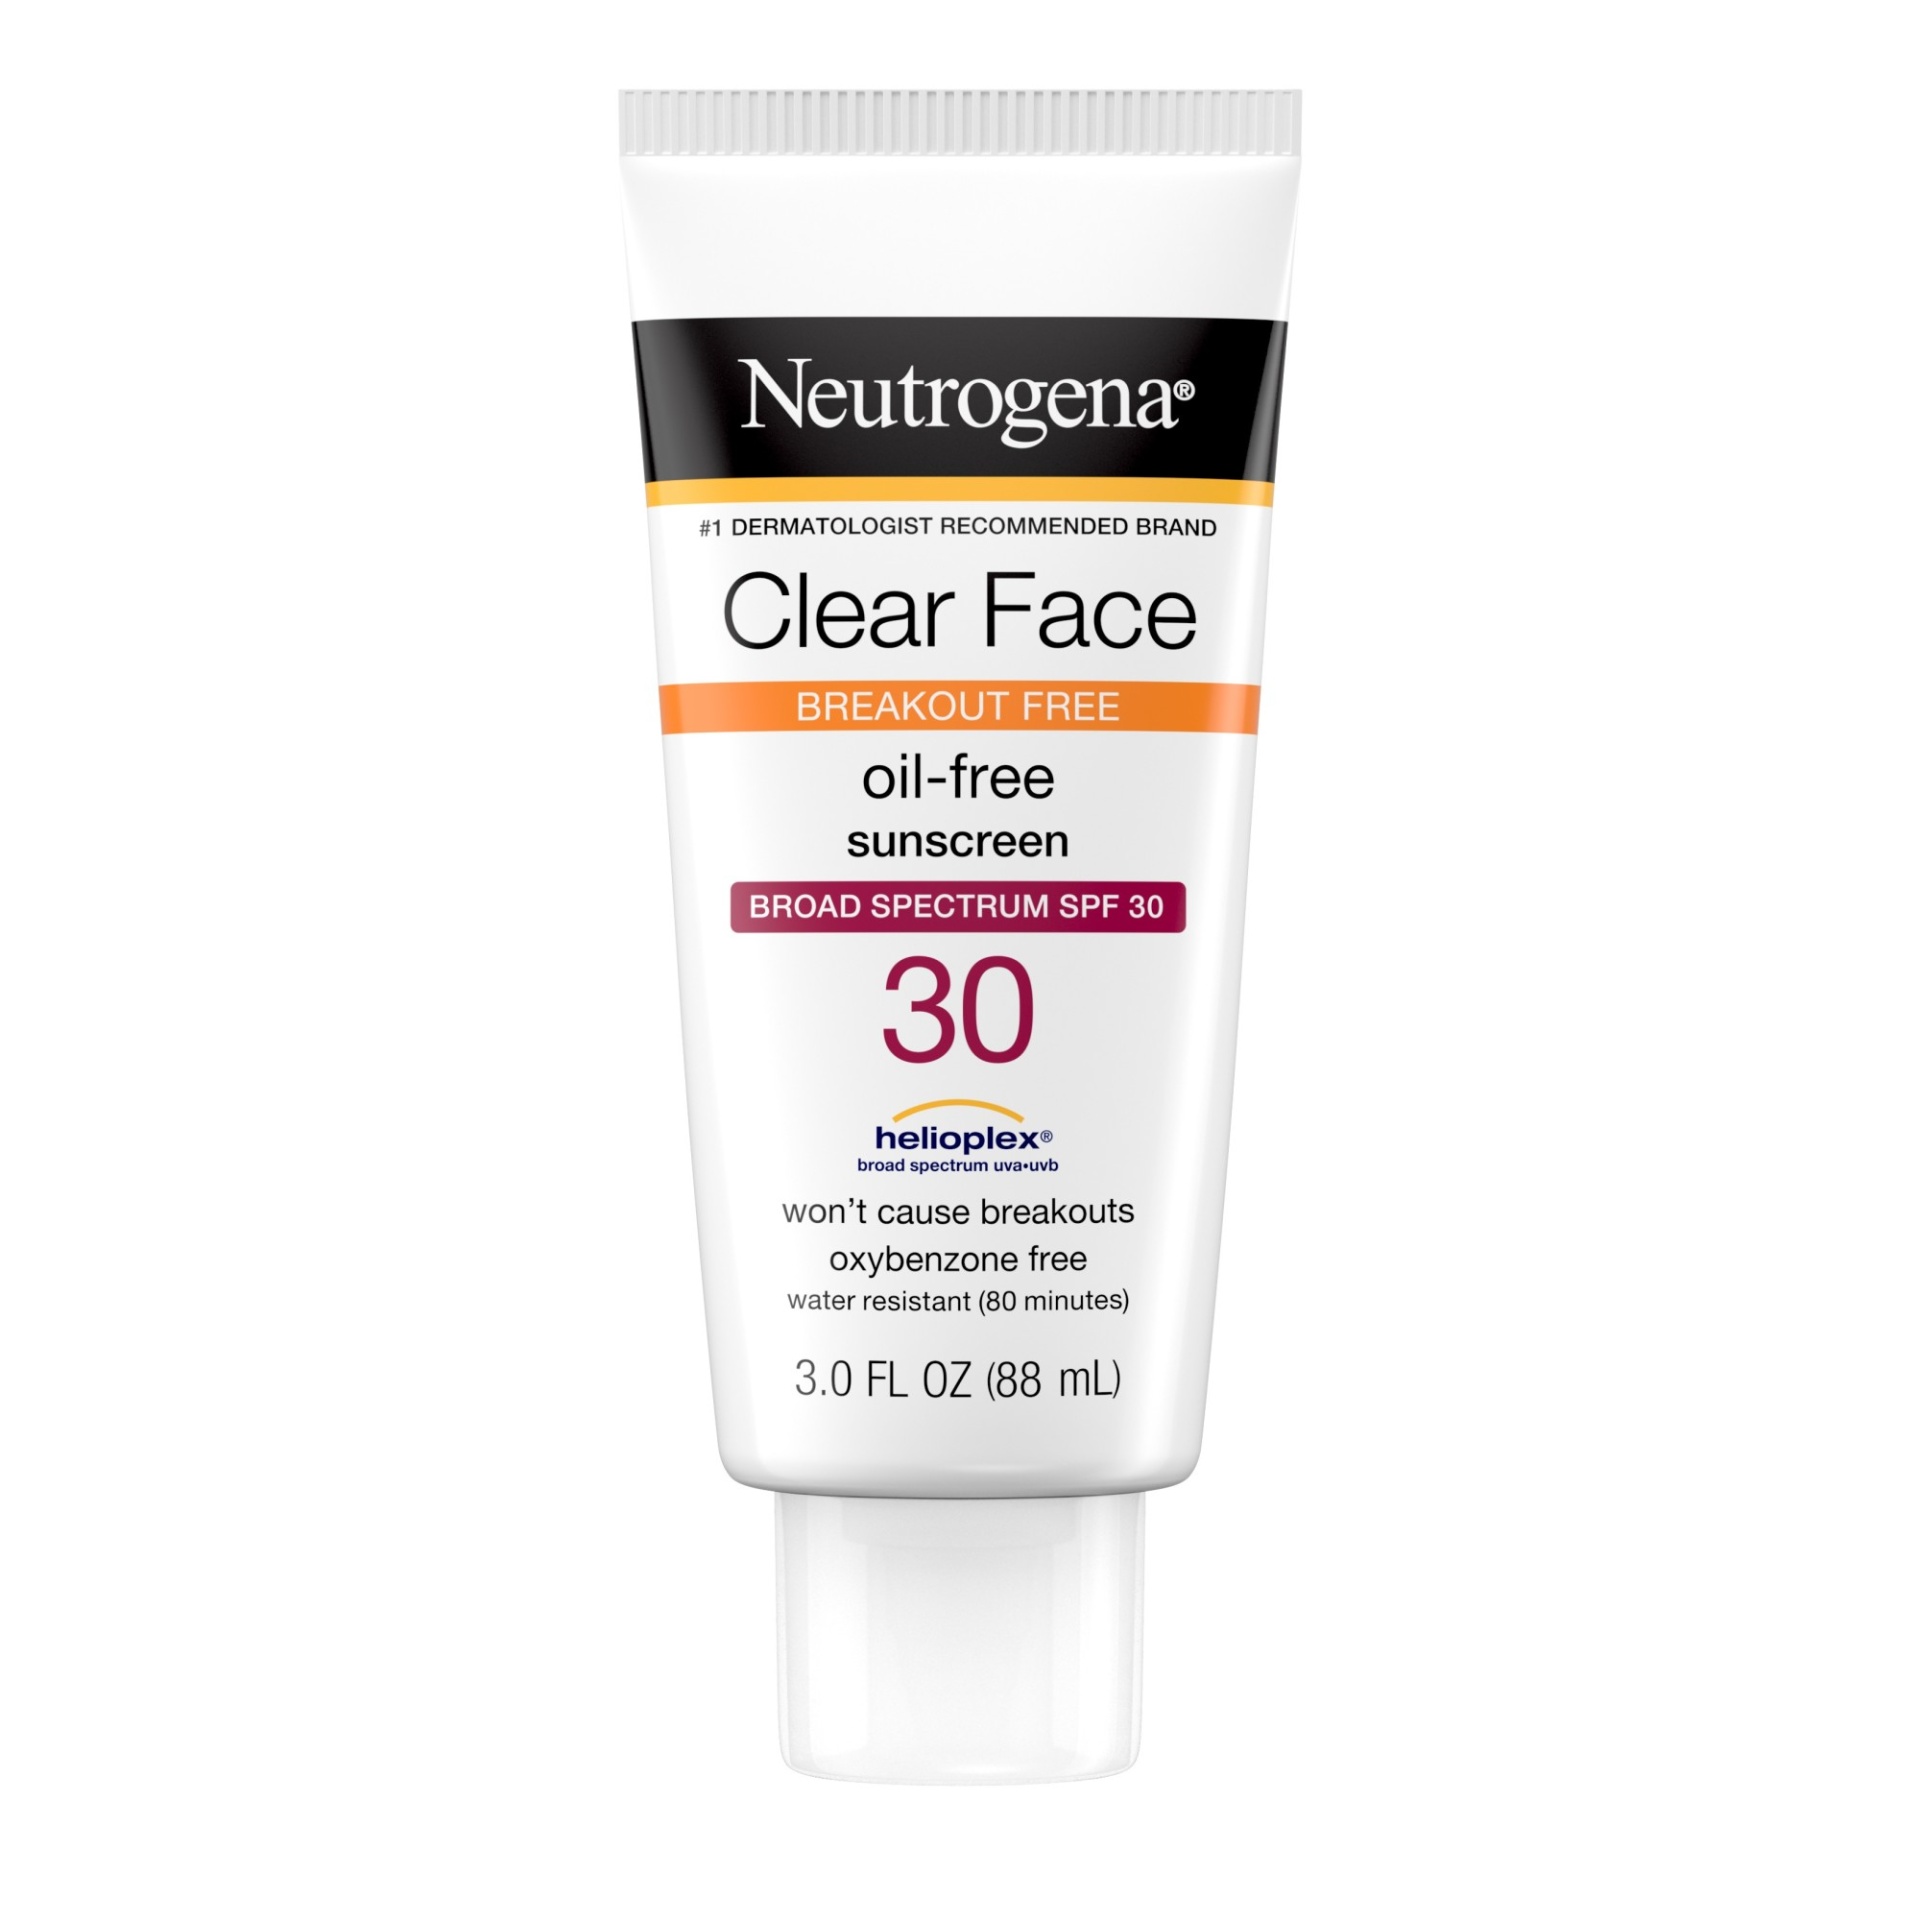 slide 1 of 3, Neutrogena Clear Face Liquid Sunscreen for Acne-Prone Skin, Broad Spectrum SPF 30 Sunscreen Lotion with Helioplex, Oxybenzone-Free, Oil-Free, Fragrance-Free; Non-Comedogenic, 3 oz